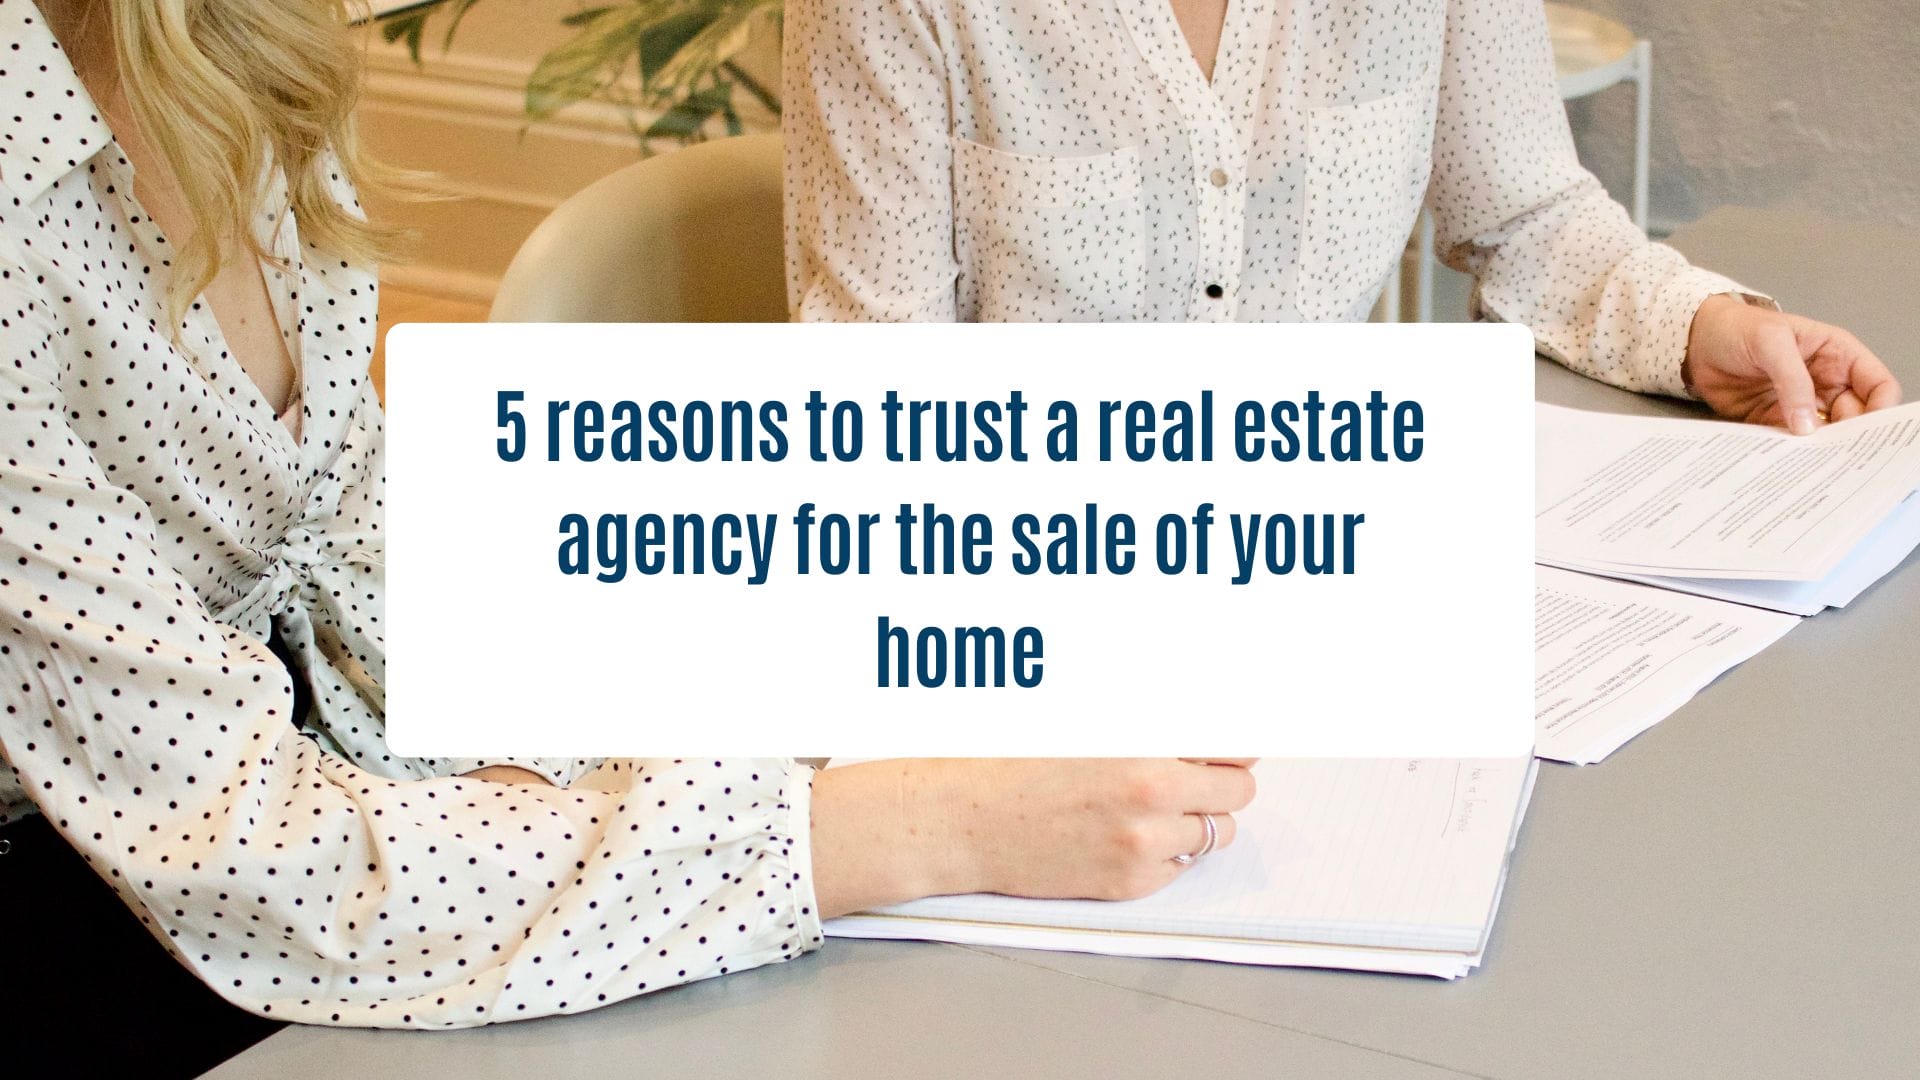 News Olam Properties - 5 reasons to trust a real estate agency for the sale of your home